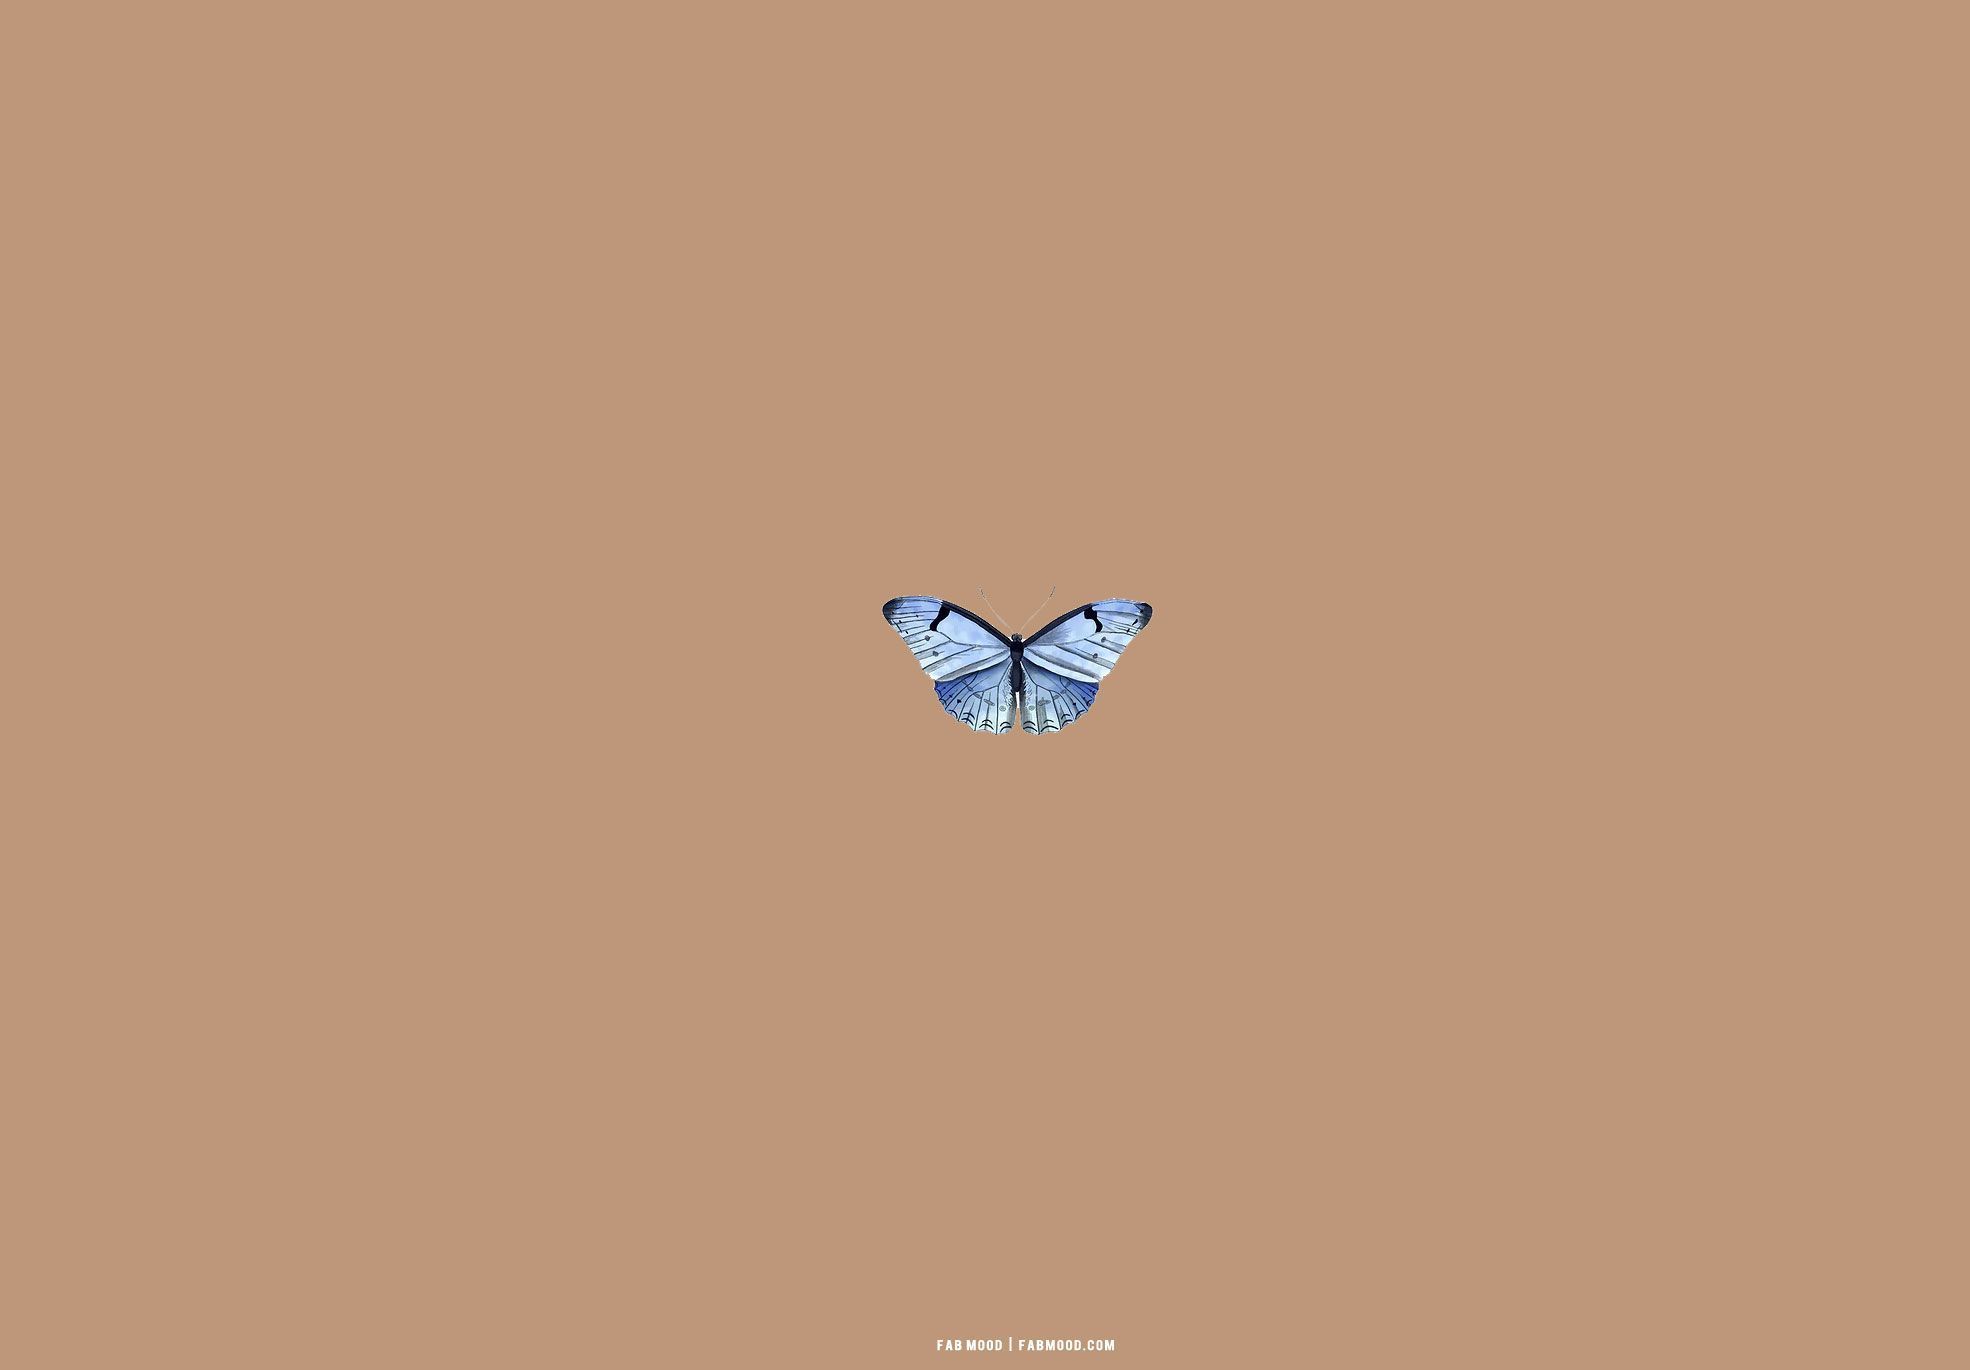 A butterfly on the wall - Brown, coral, wedding, light brown, butterfly, lemon